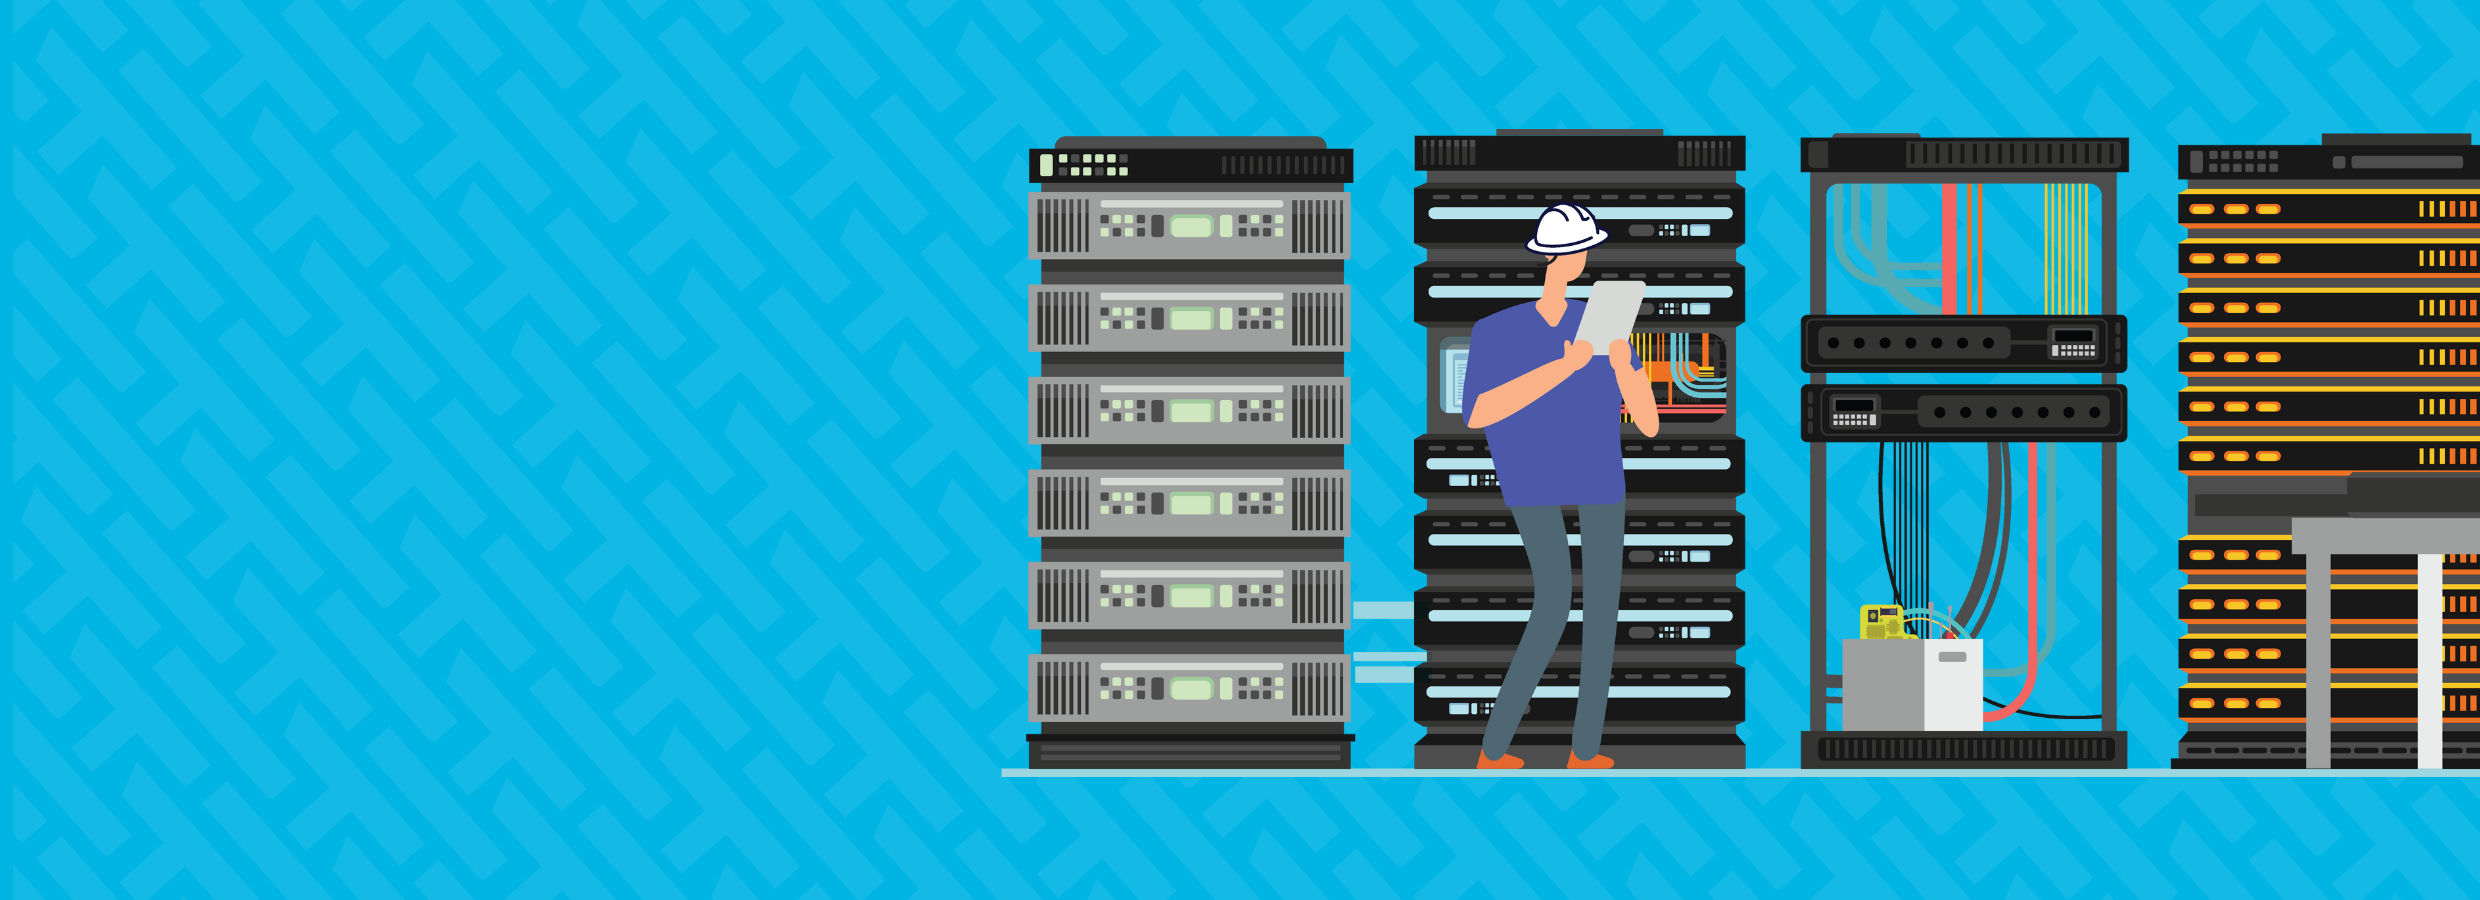 An illustration of a construction worker on his tablet standing in front of server and storage datacenter stacks. 